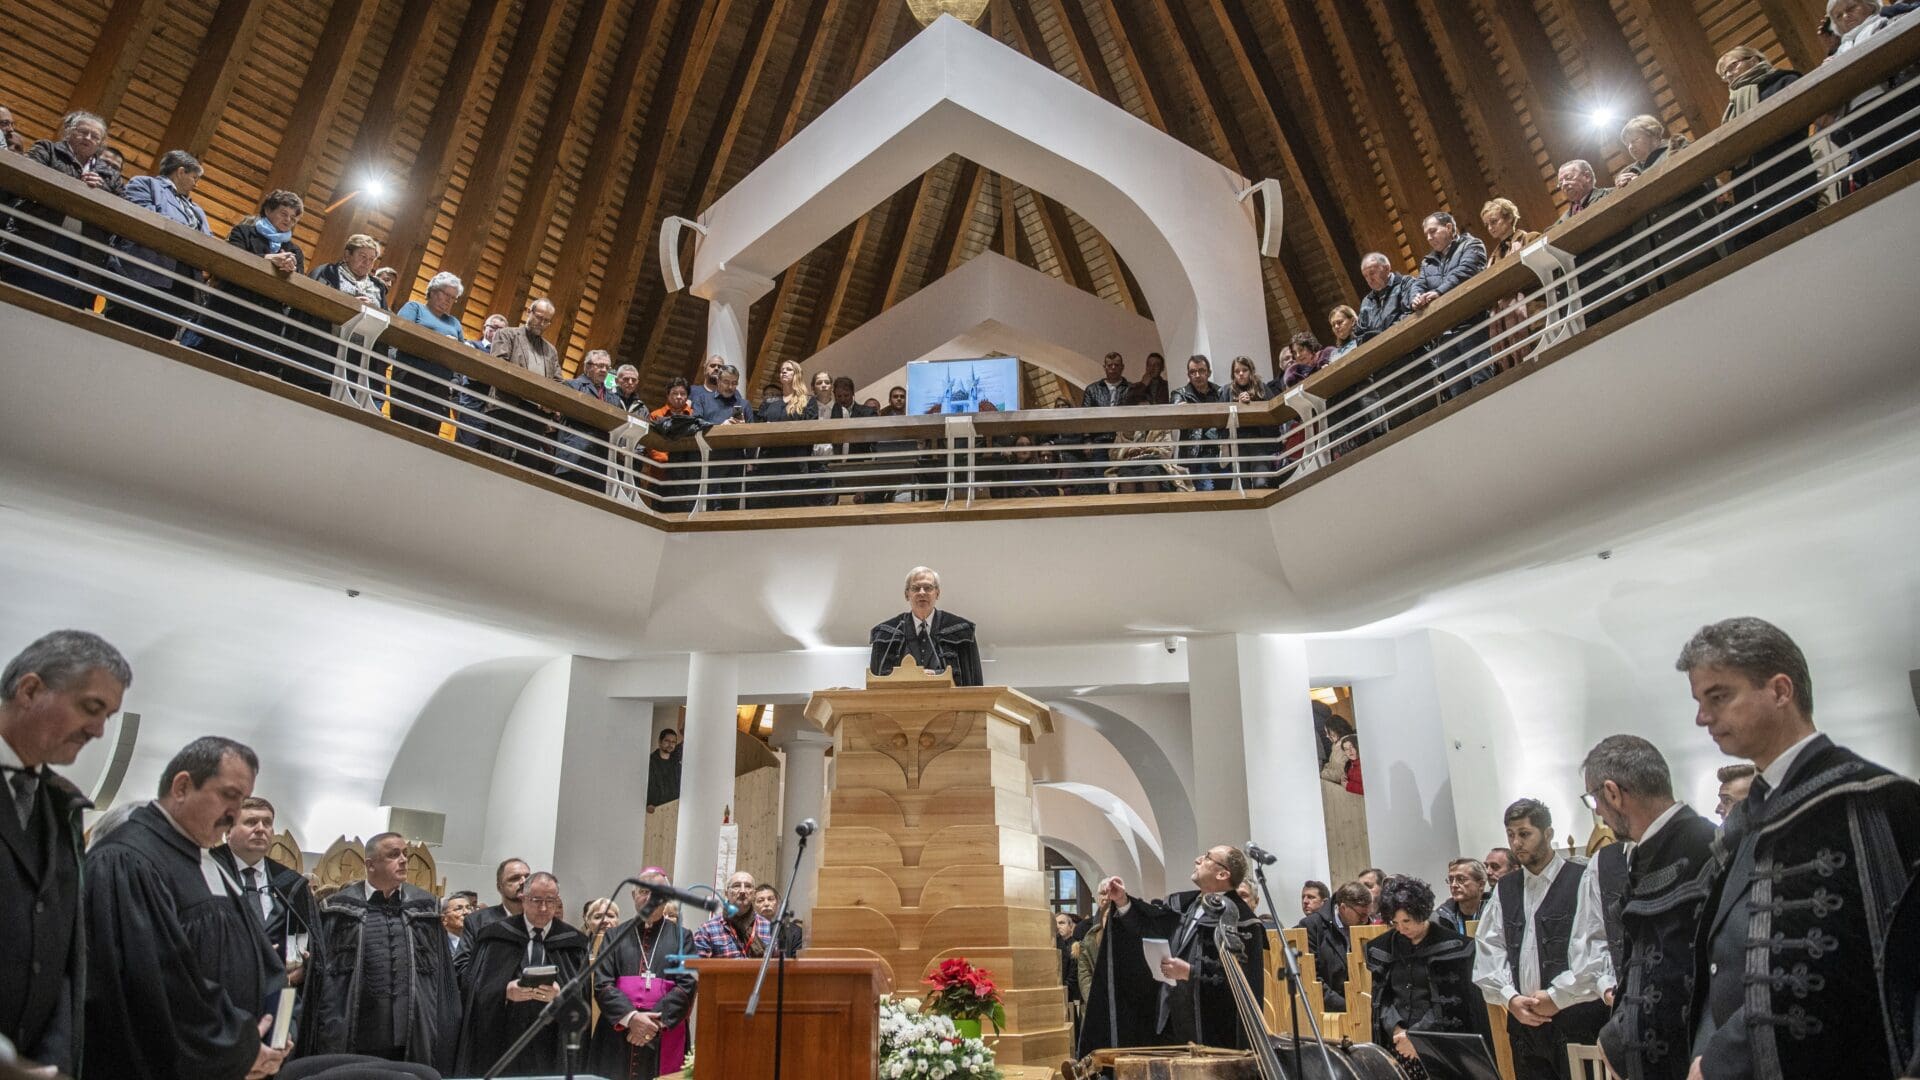 László Tőkés delivering a sermon in the church of the New Millennium Reformed Church Centre in Temesvár on the 30th anniversary of the revolution on 15 December 2019.